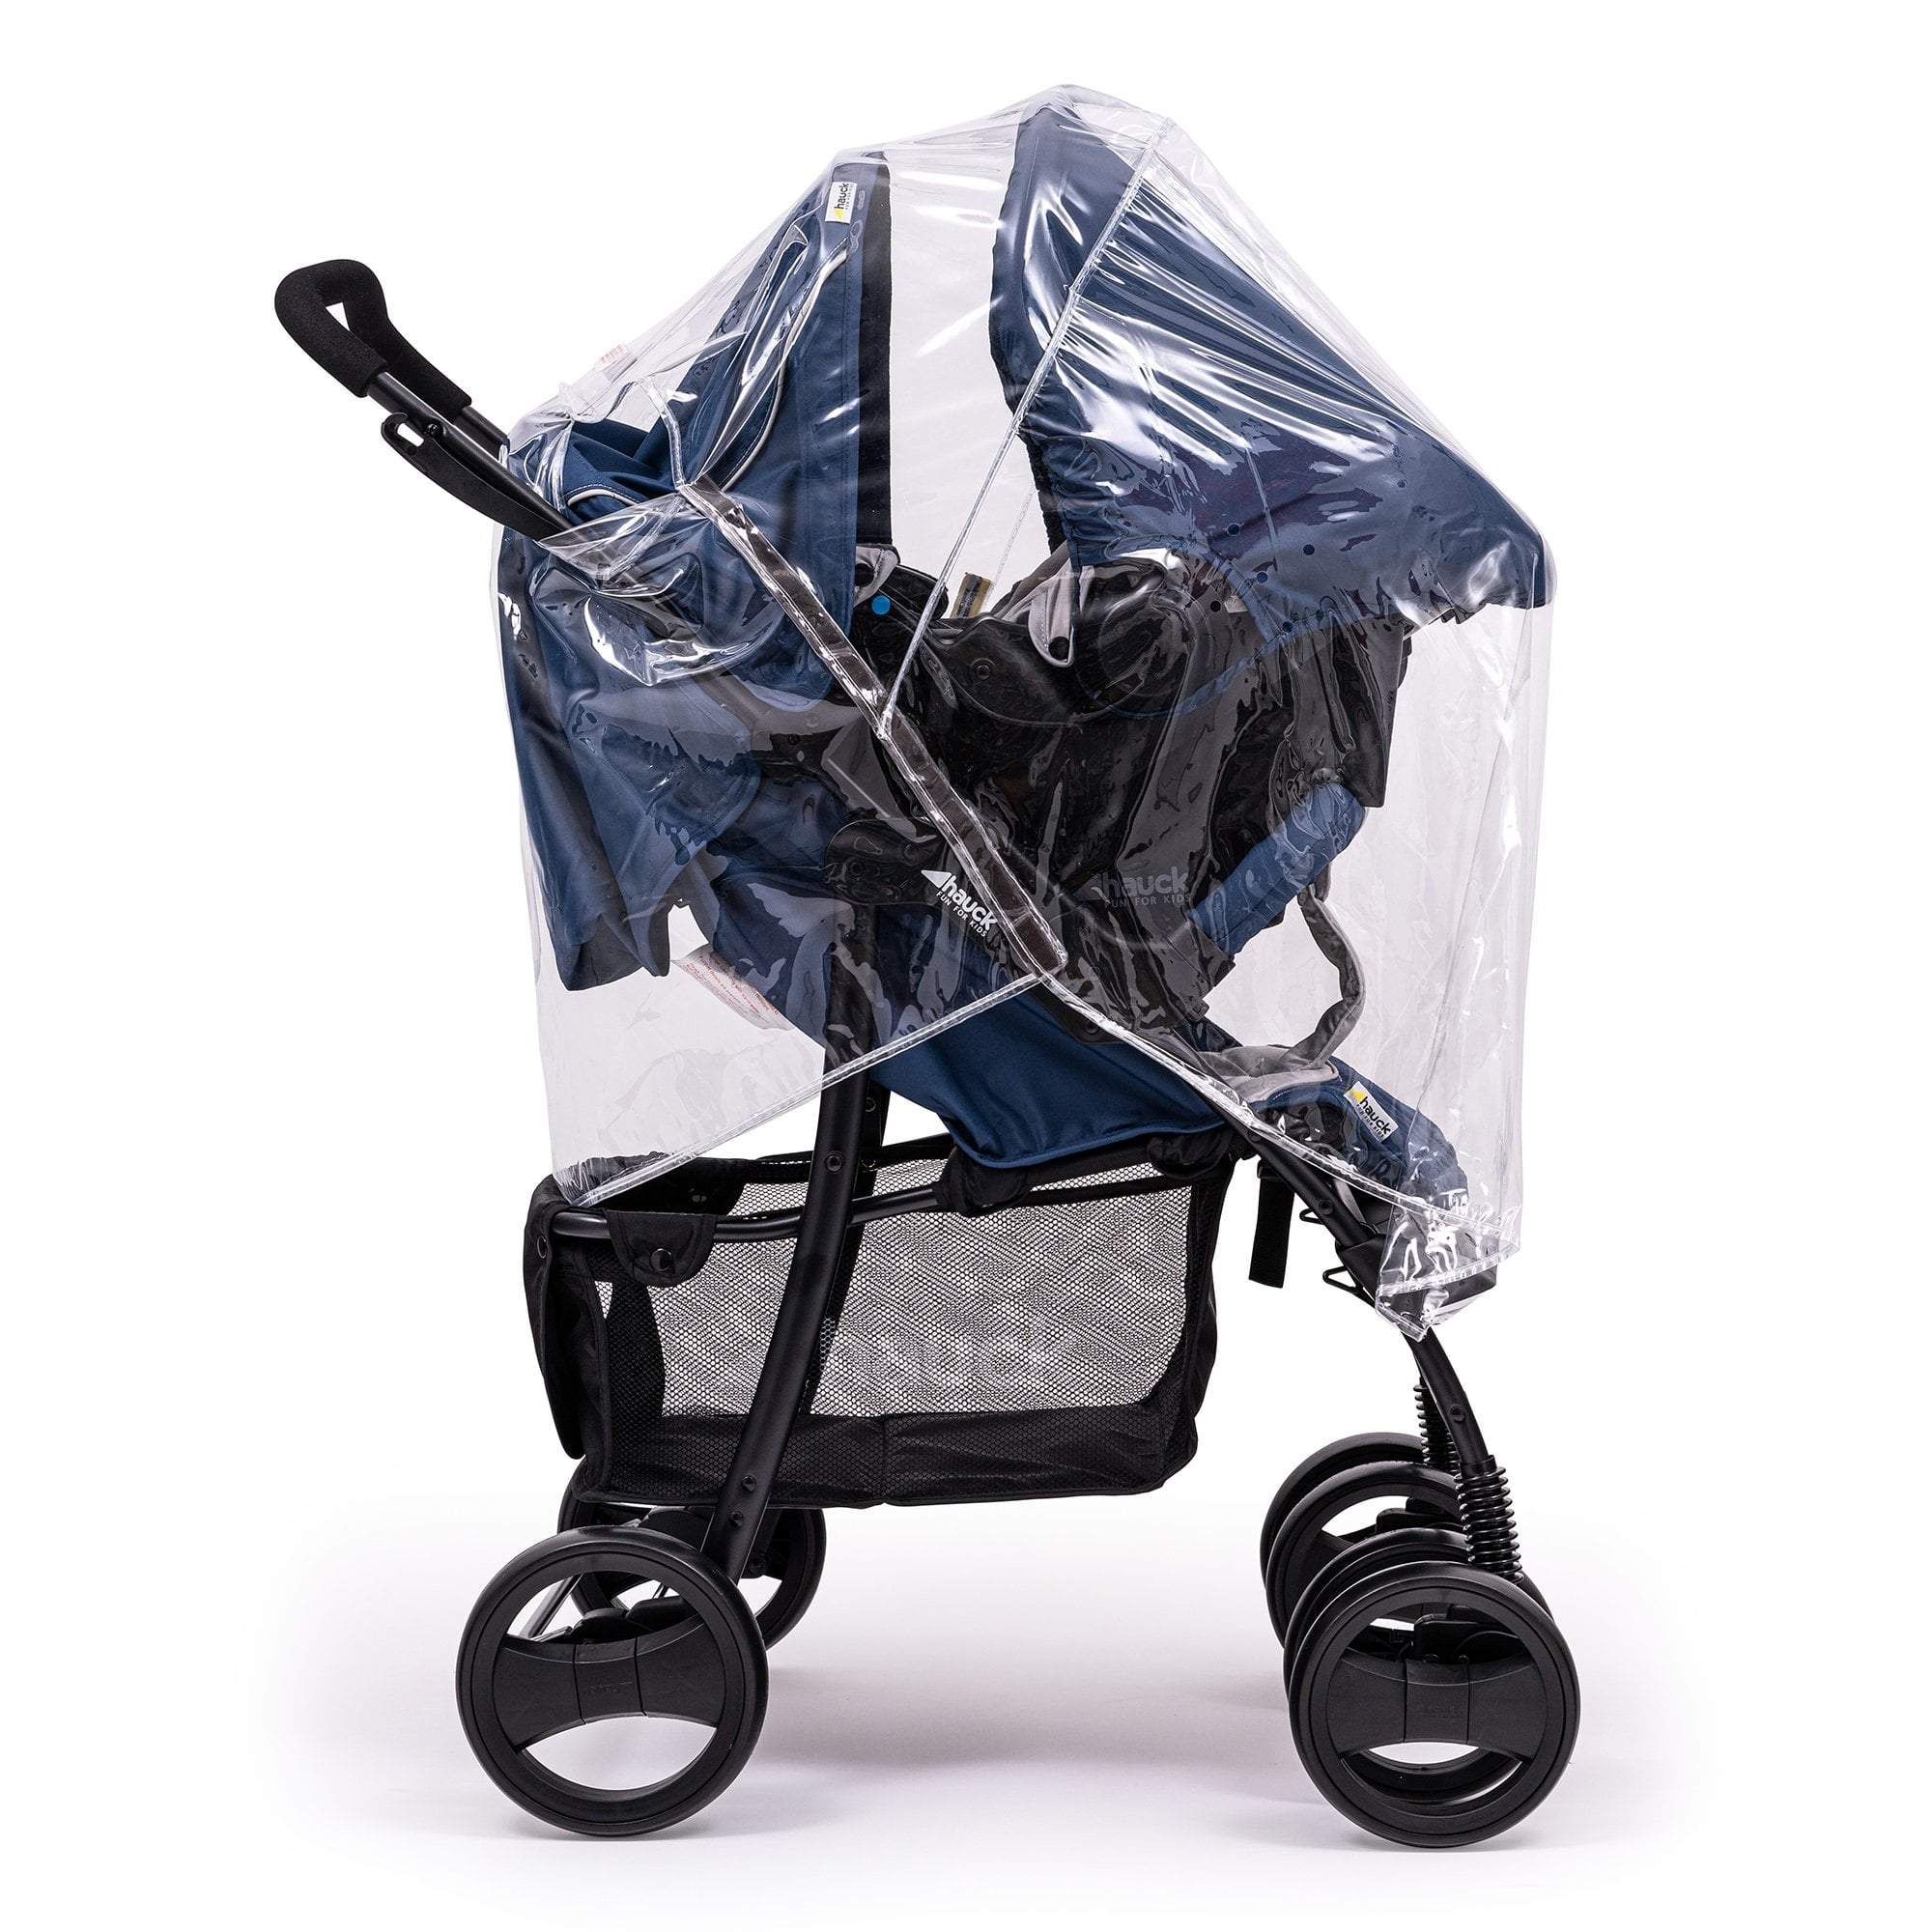 Travel System Raincover Compatible with Teutonia - Fits All Models - For Your Little One